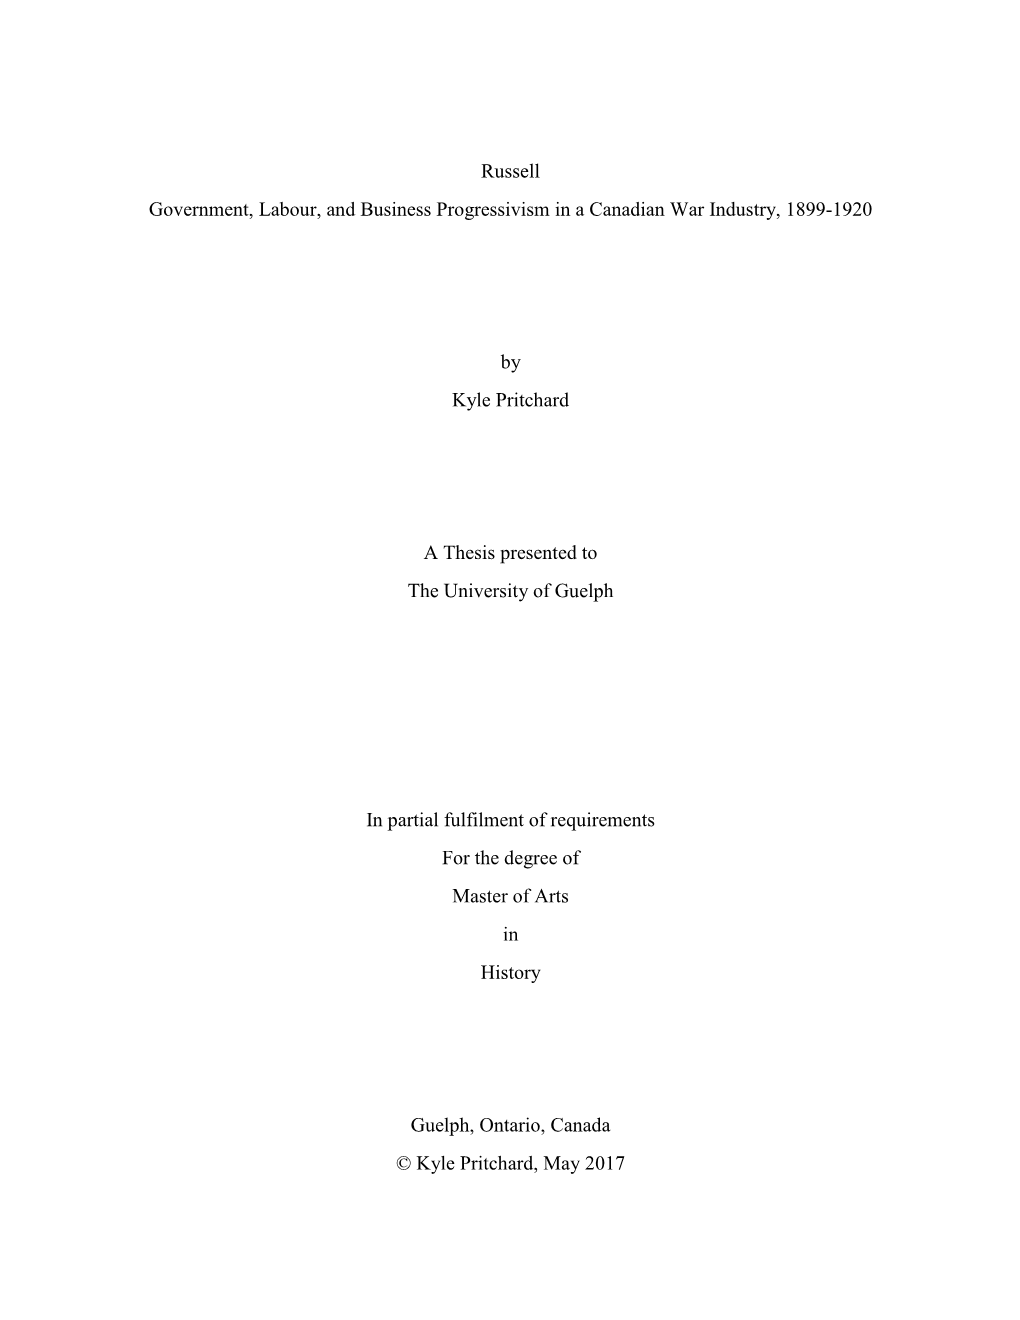 Russell Government, Labour, and Business Progressivism in a Canadian War Industry, 1899-1920